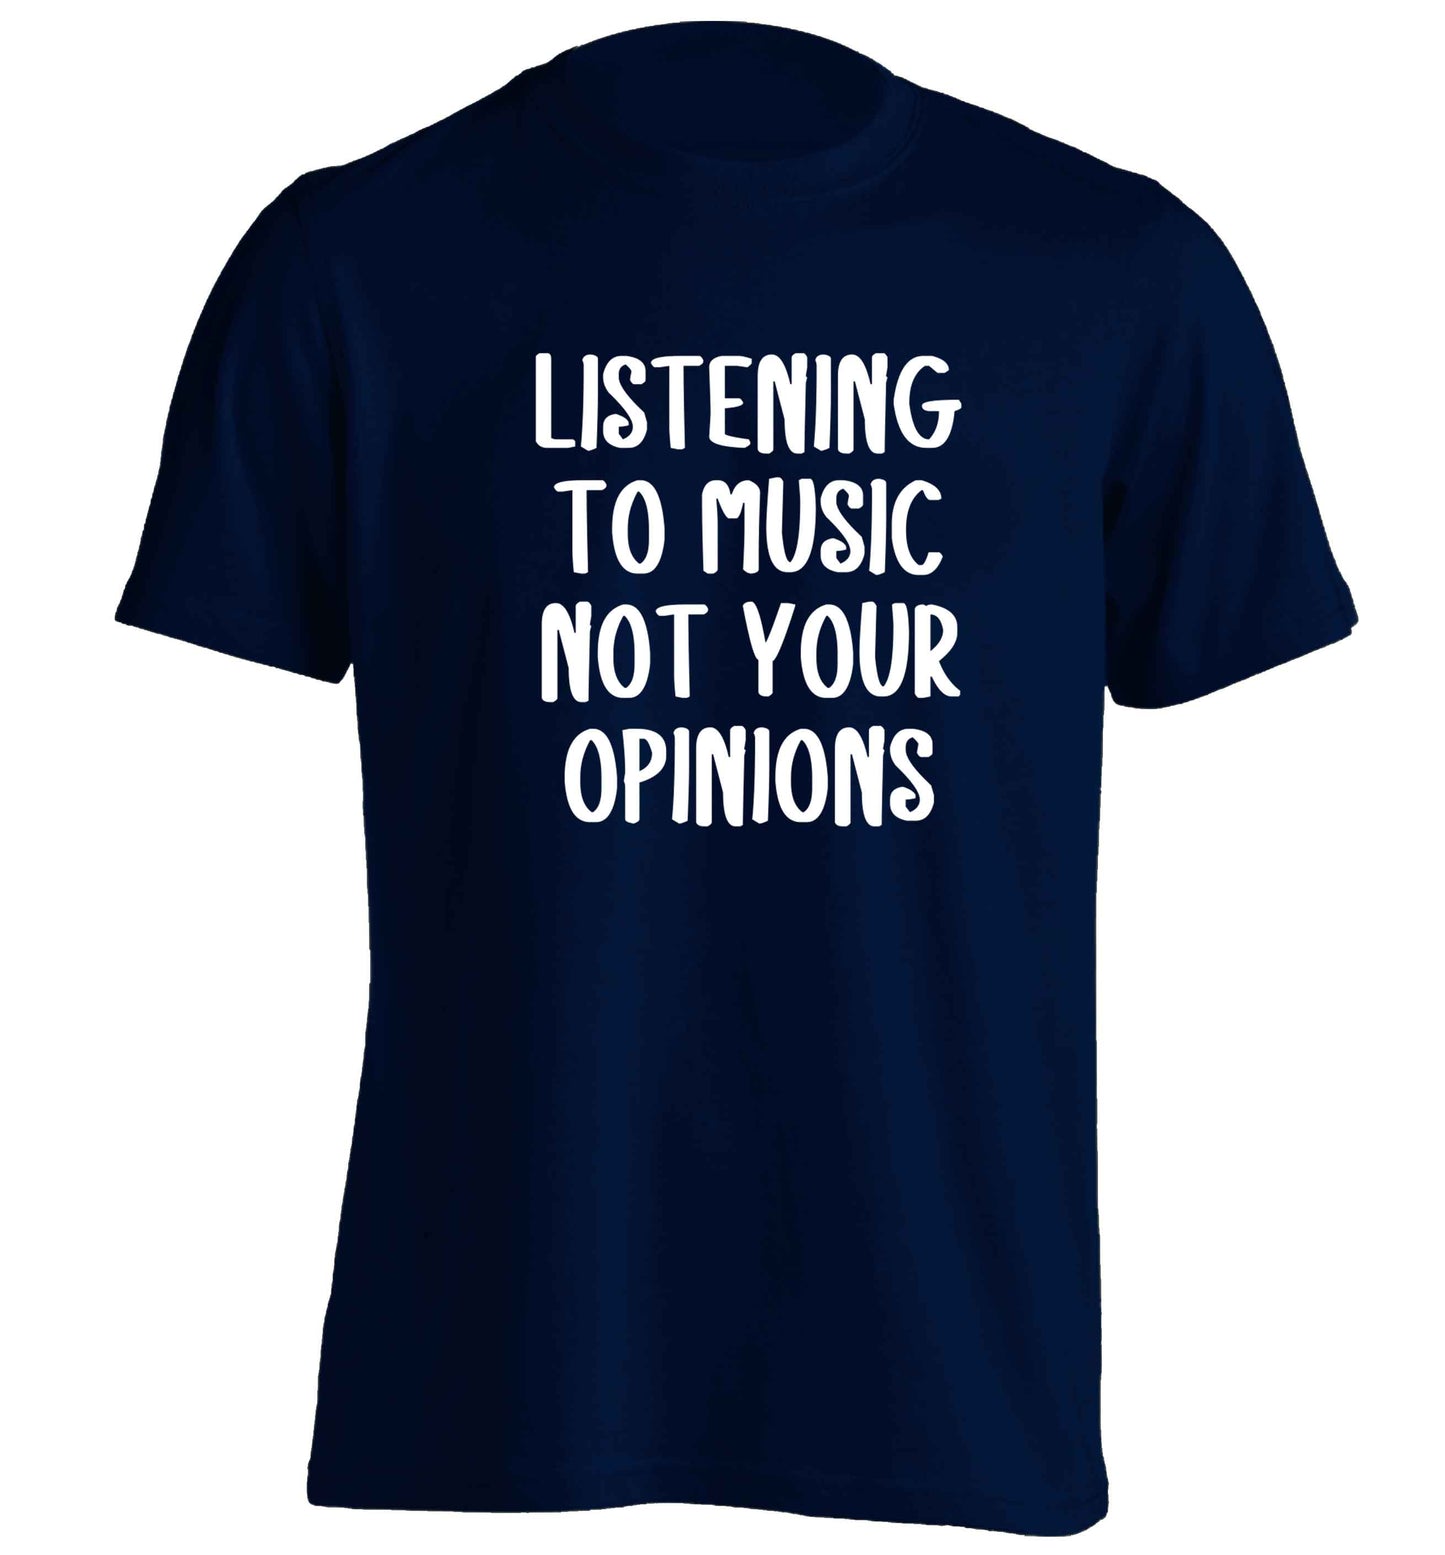 Listening to music not your opinions adults unisex navy Tshirt 2XL